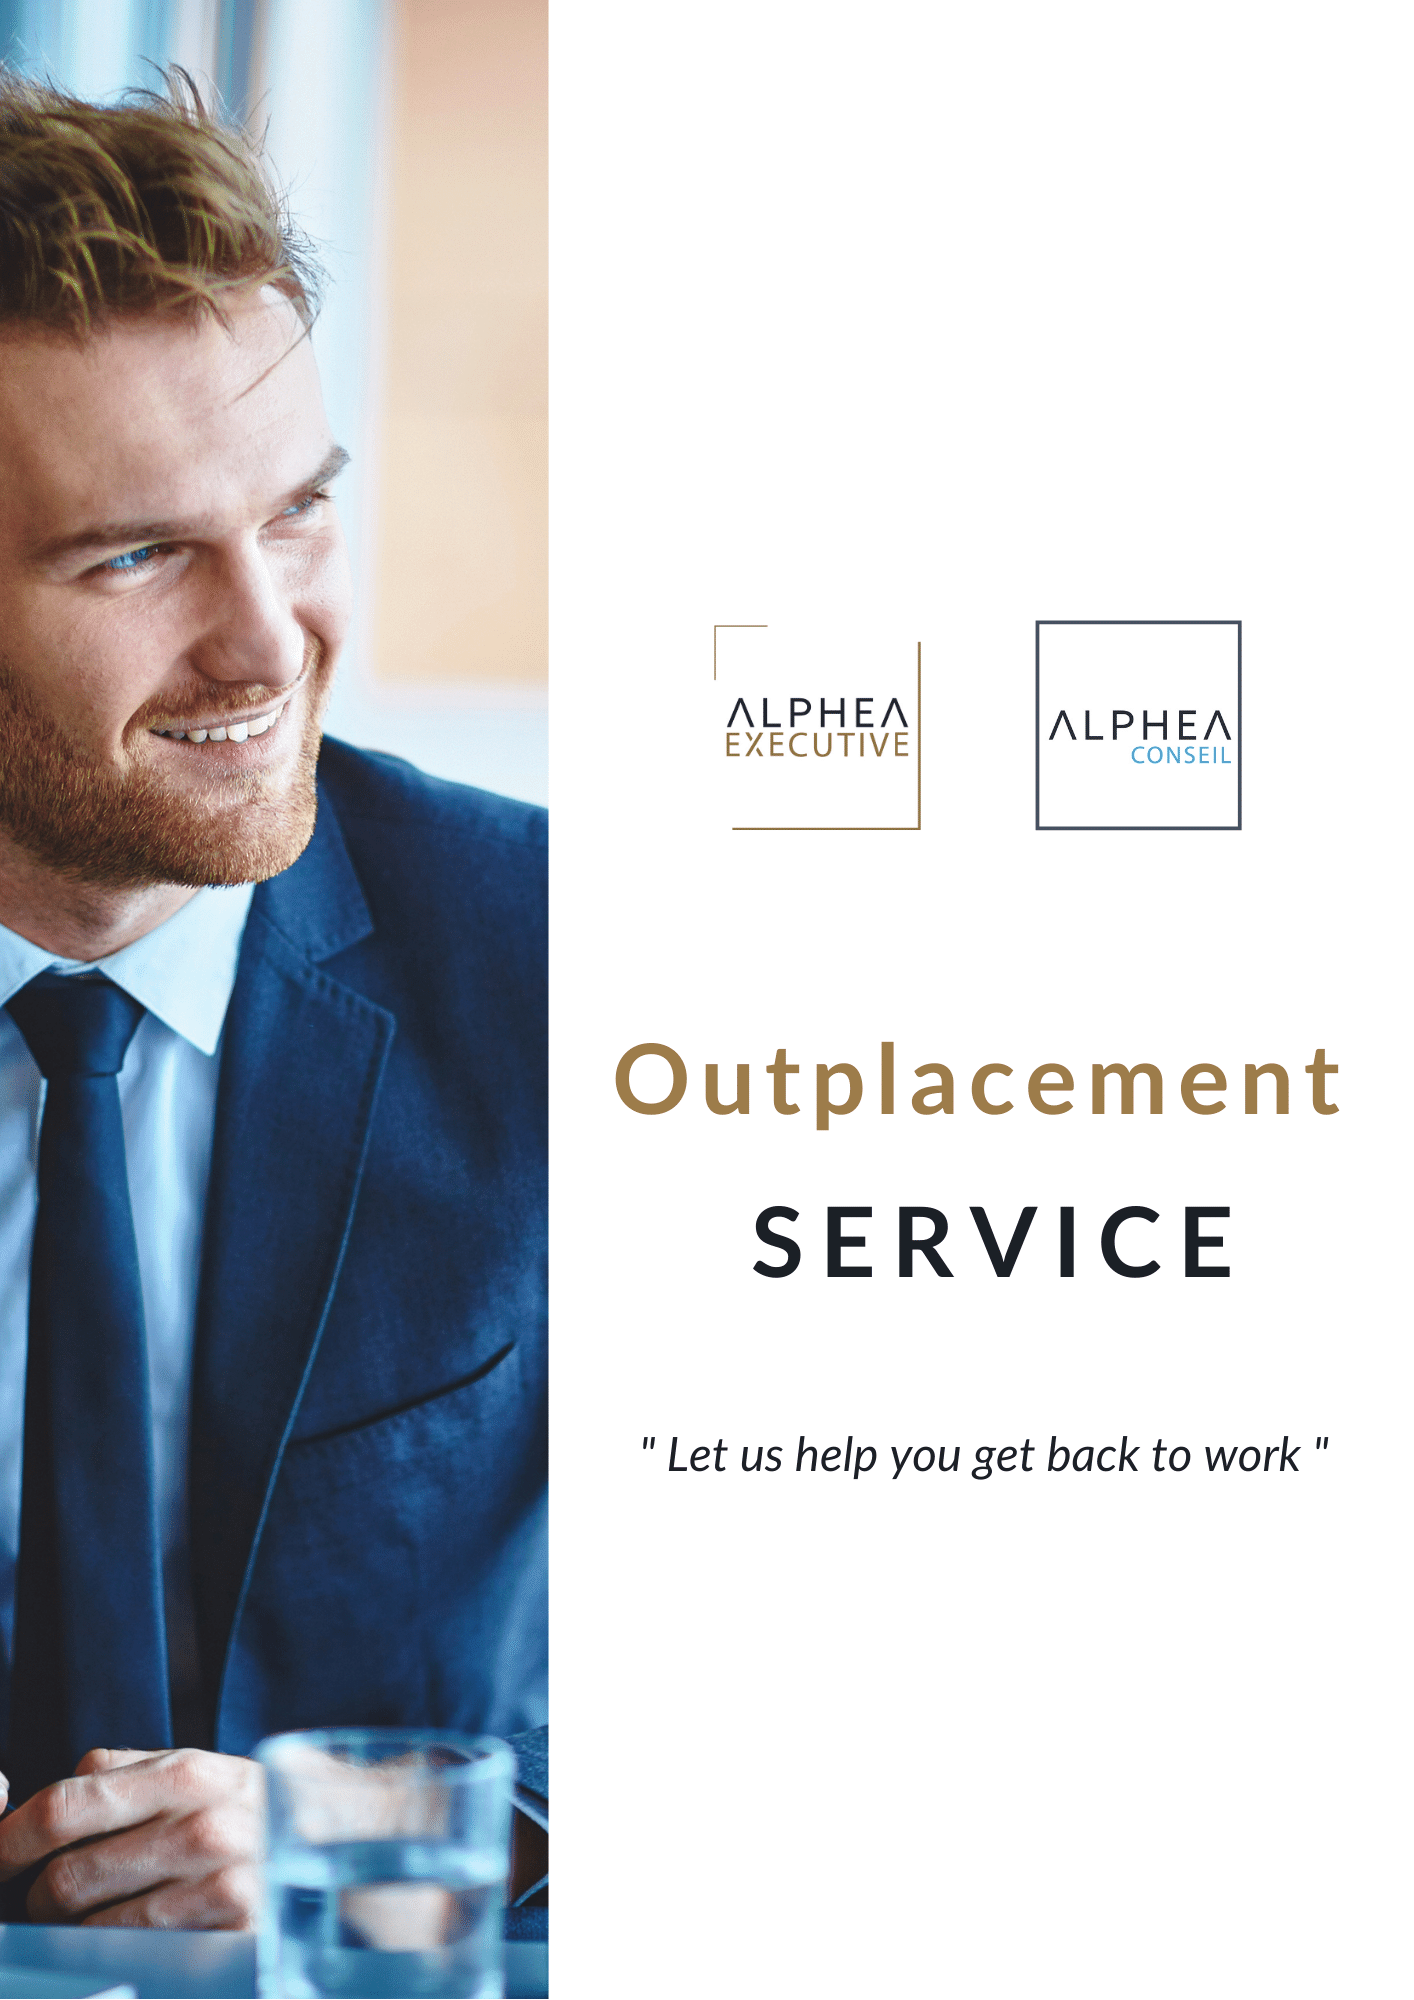 Outplacement service